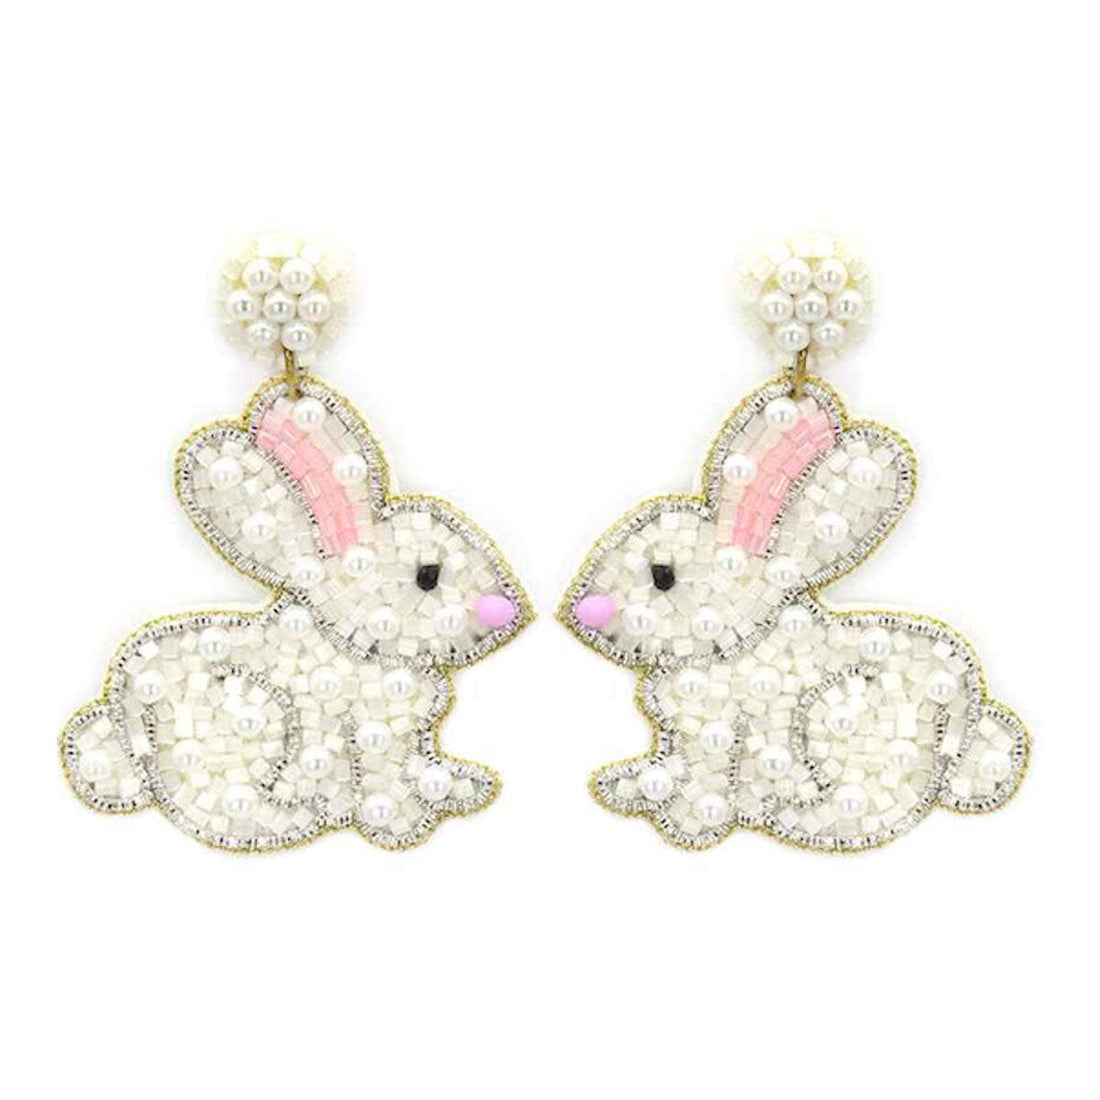 Some-Bunny Loves You Earrings